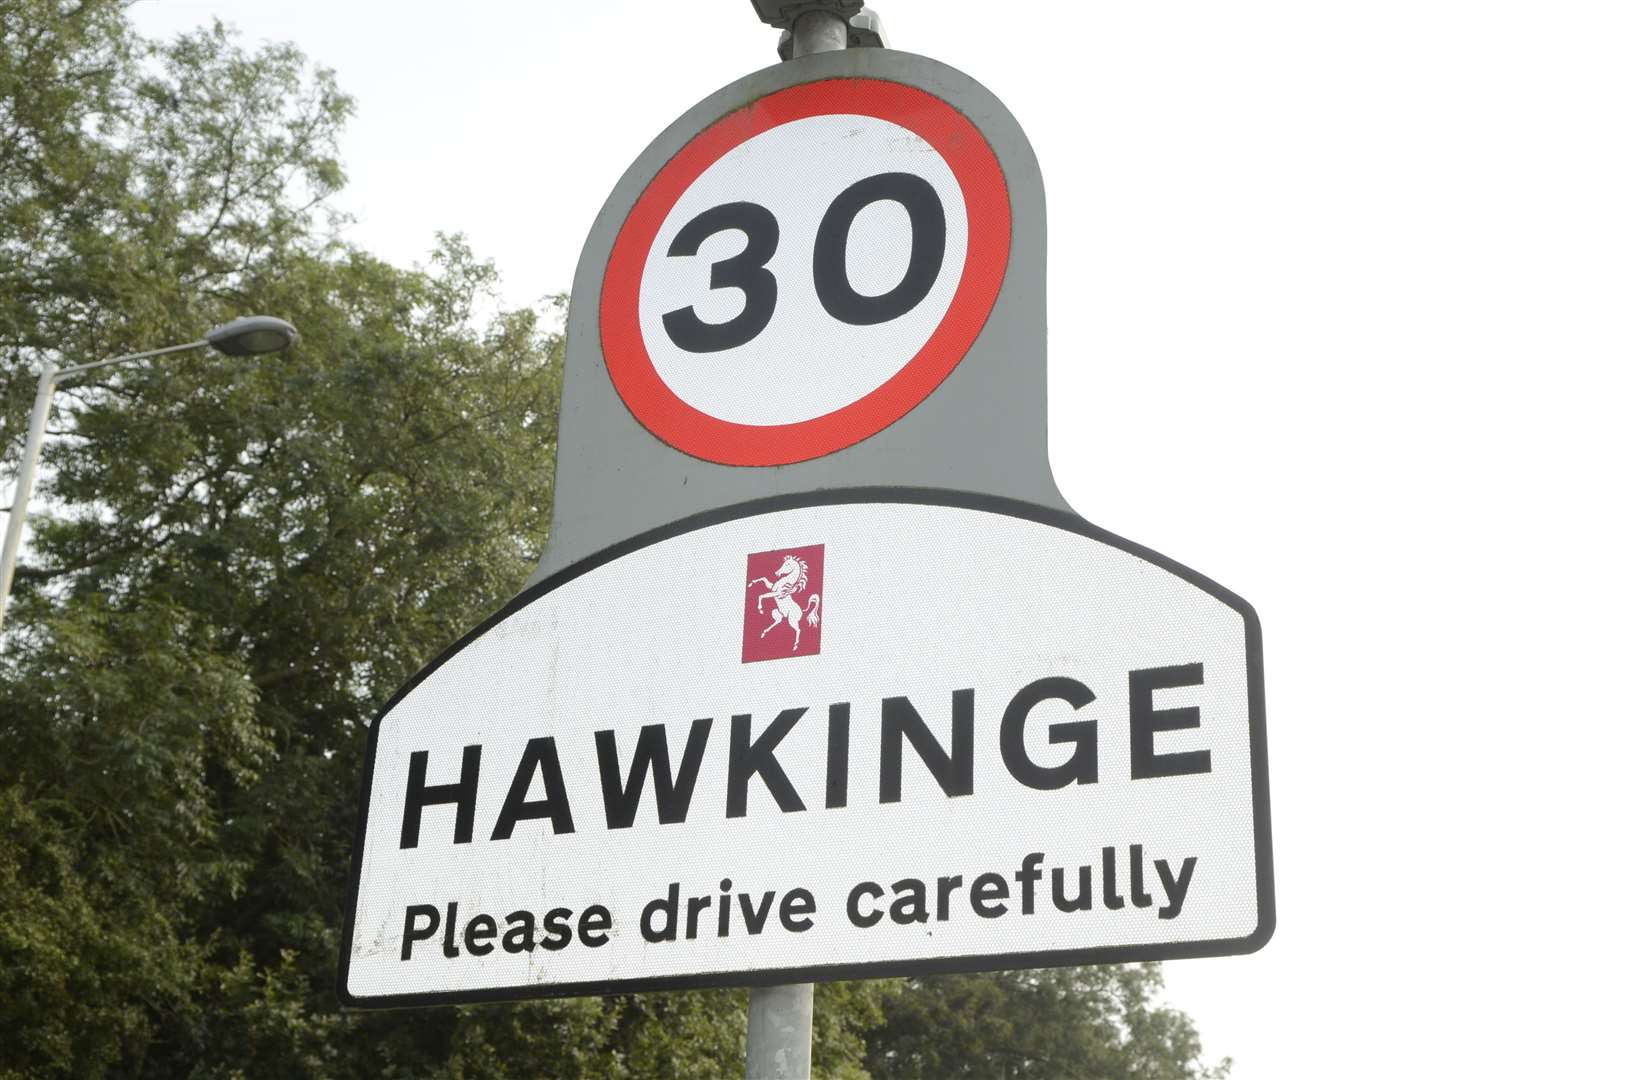 Hawkinge Town Council are taking action